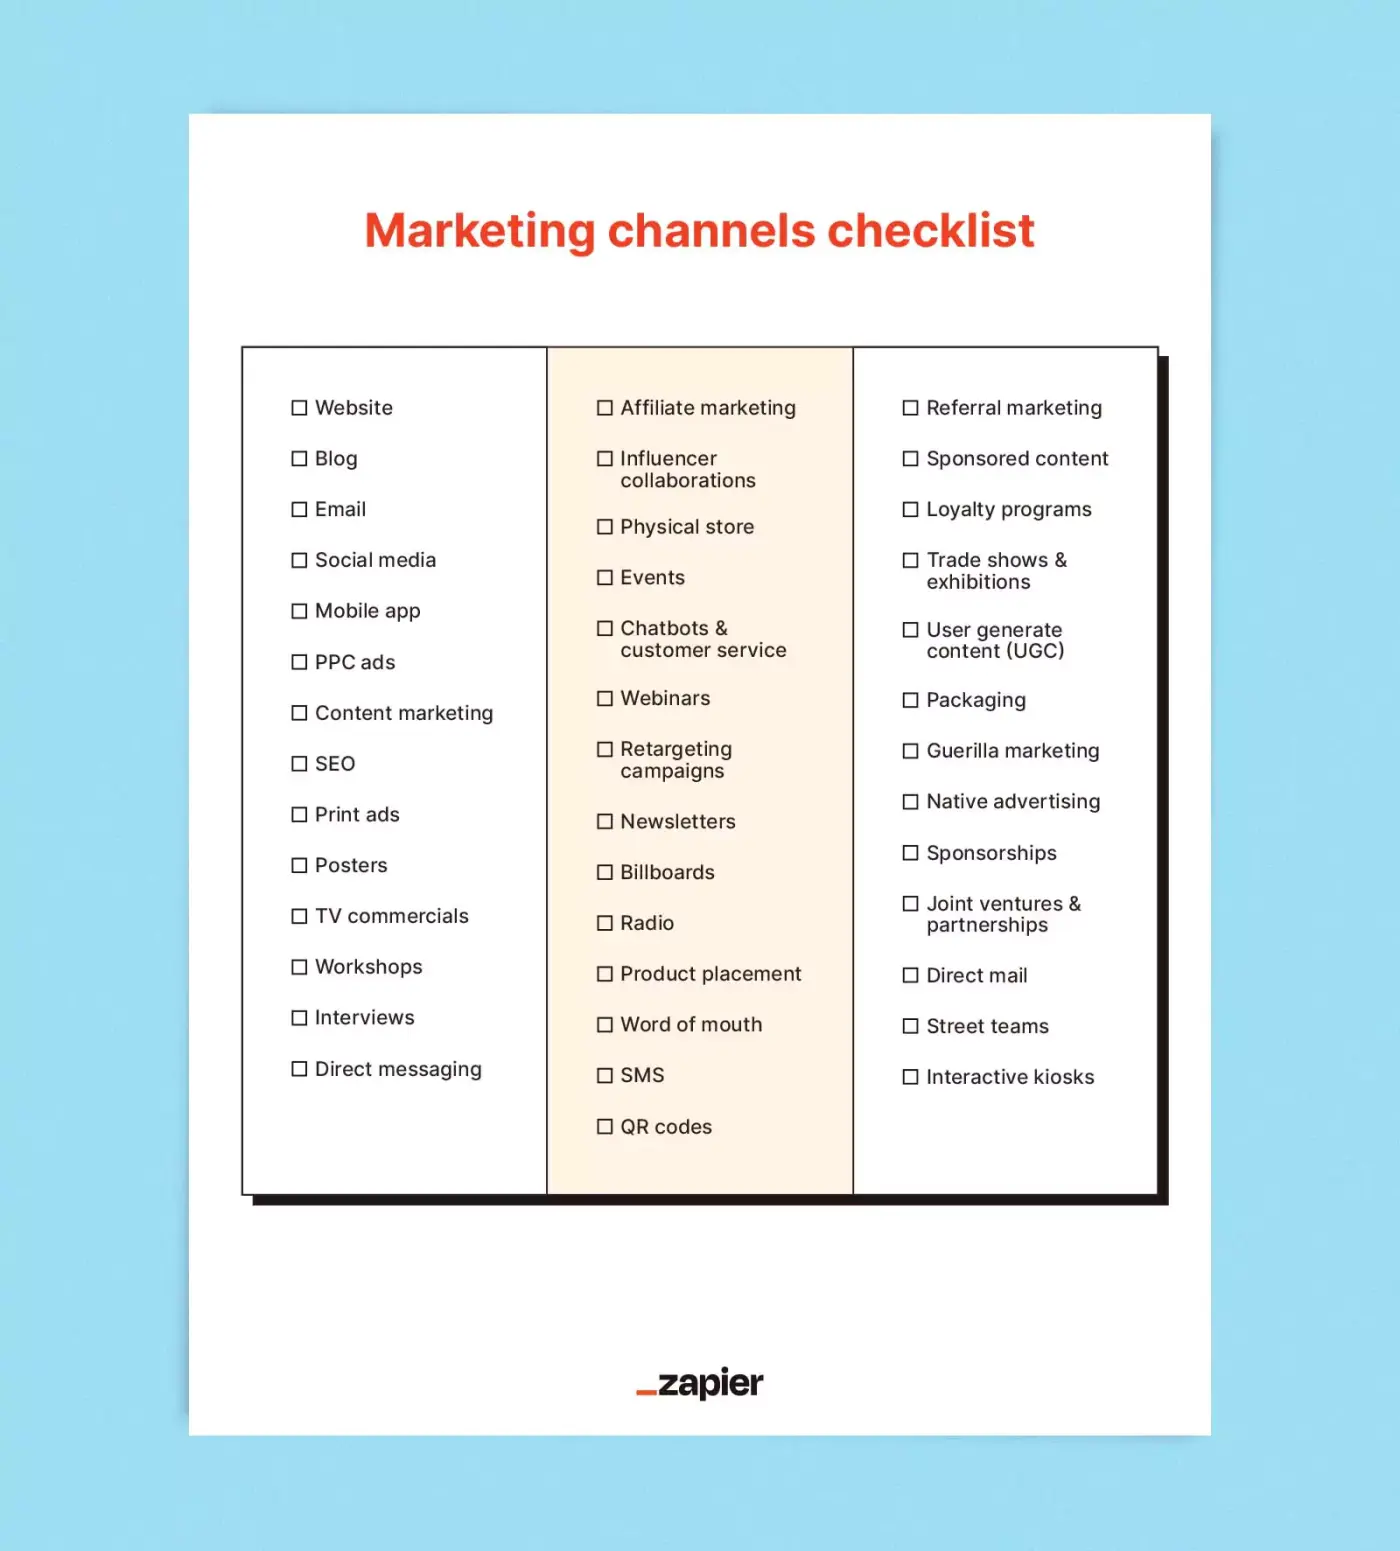 Image of a checklist on a light blue background with all the different kinds of marketing channels, like email, social media, events, radio, sponsored content, loyalty programs, etc